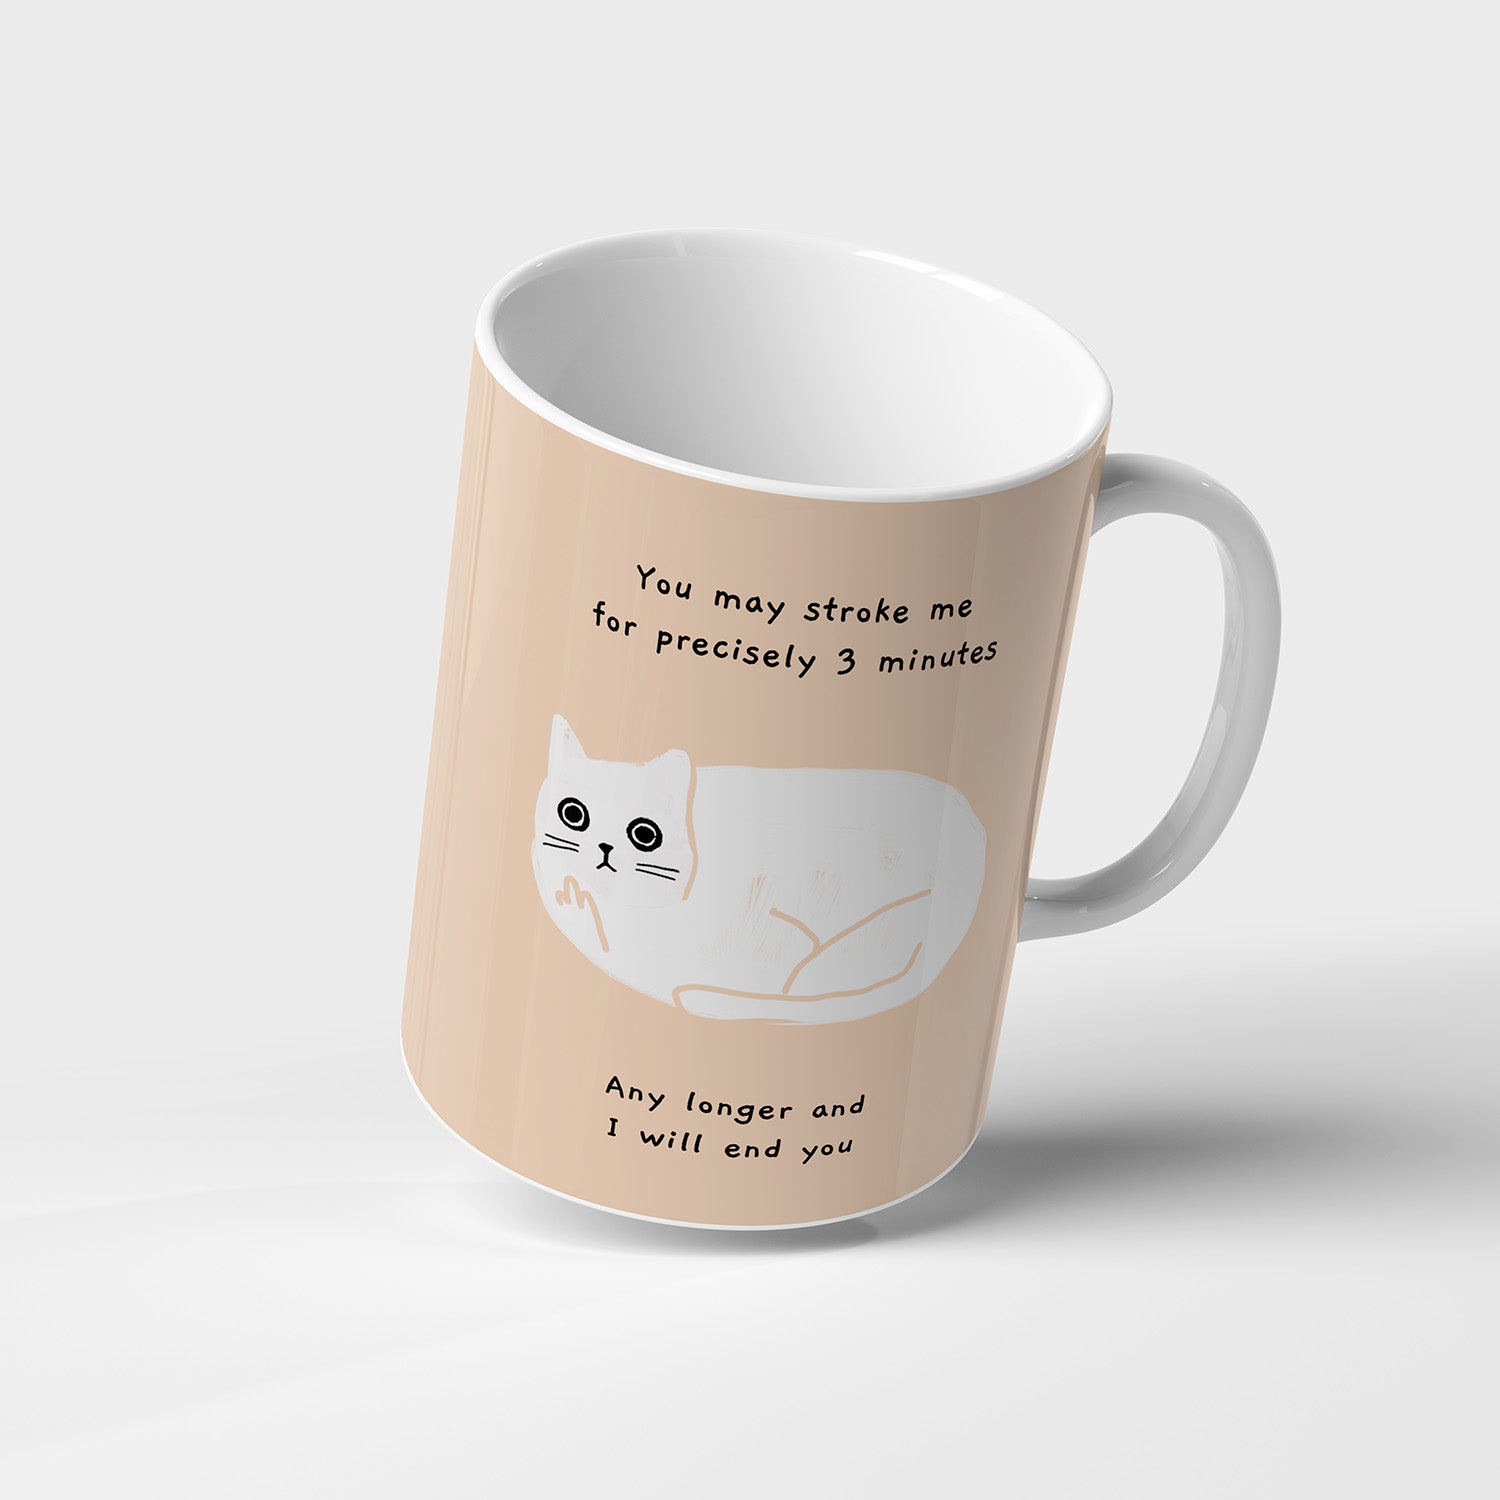 Ken the cat you may stroke me for precisely 3 minutes, any longer and I will end you funny ceramic mug with all over print - Funny Cat Mug in Coral